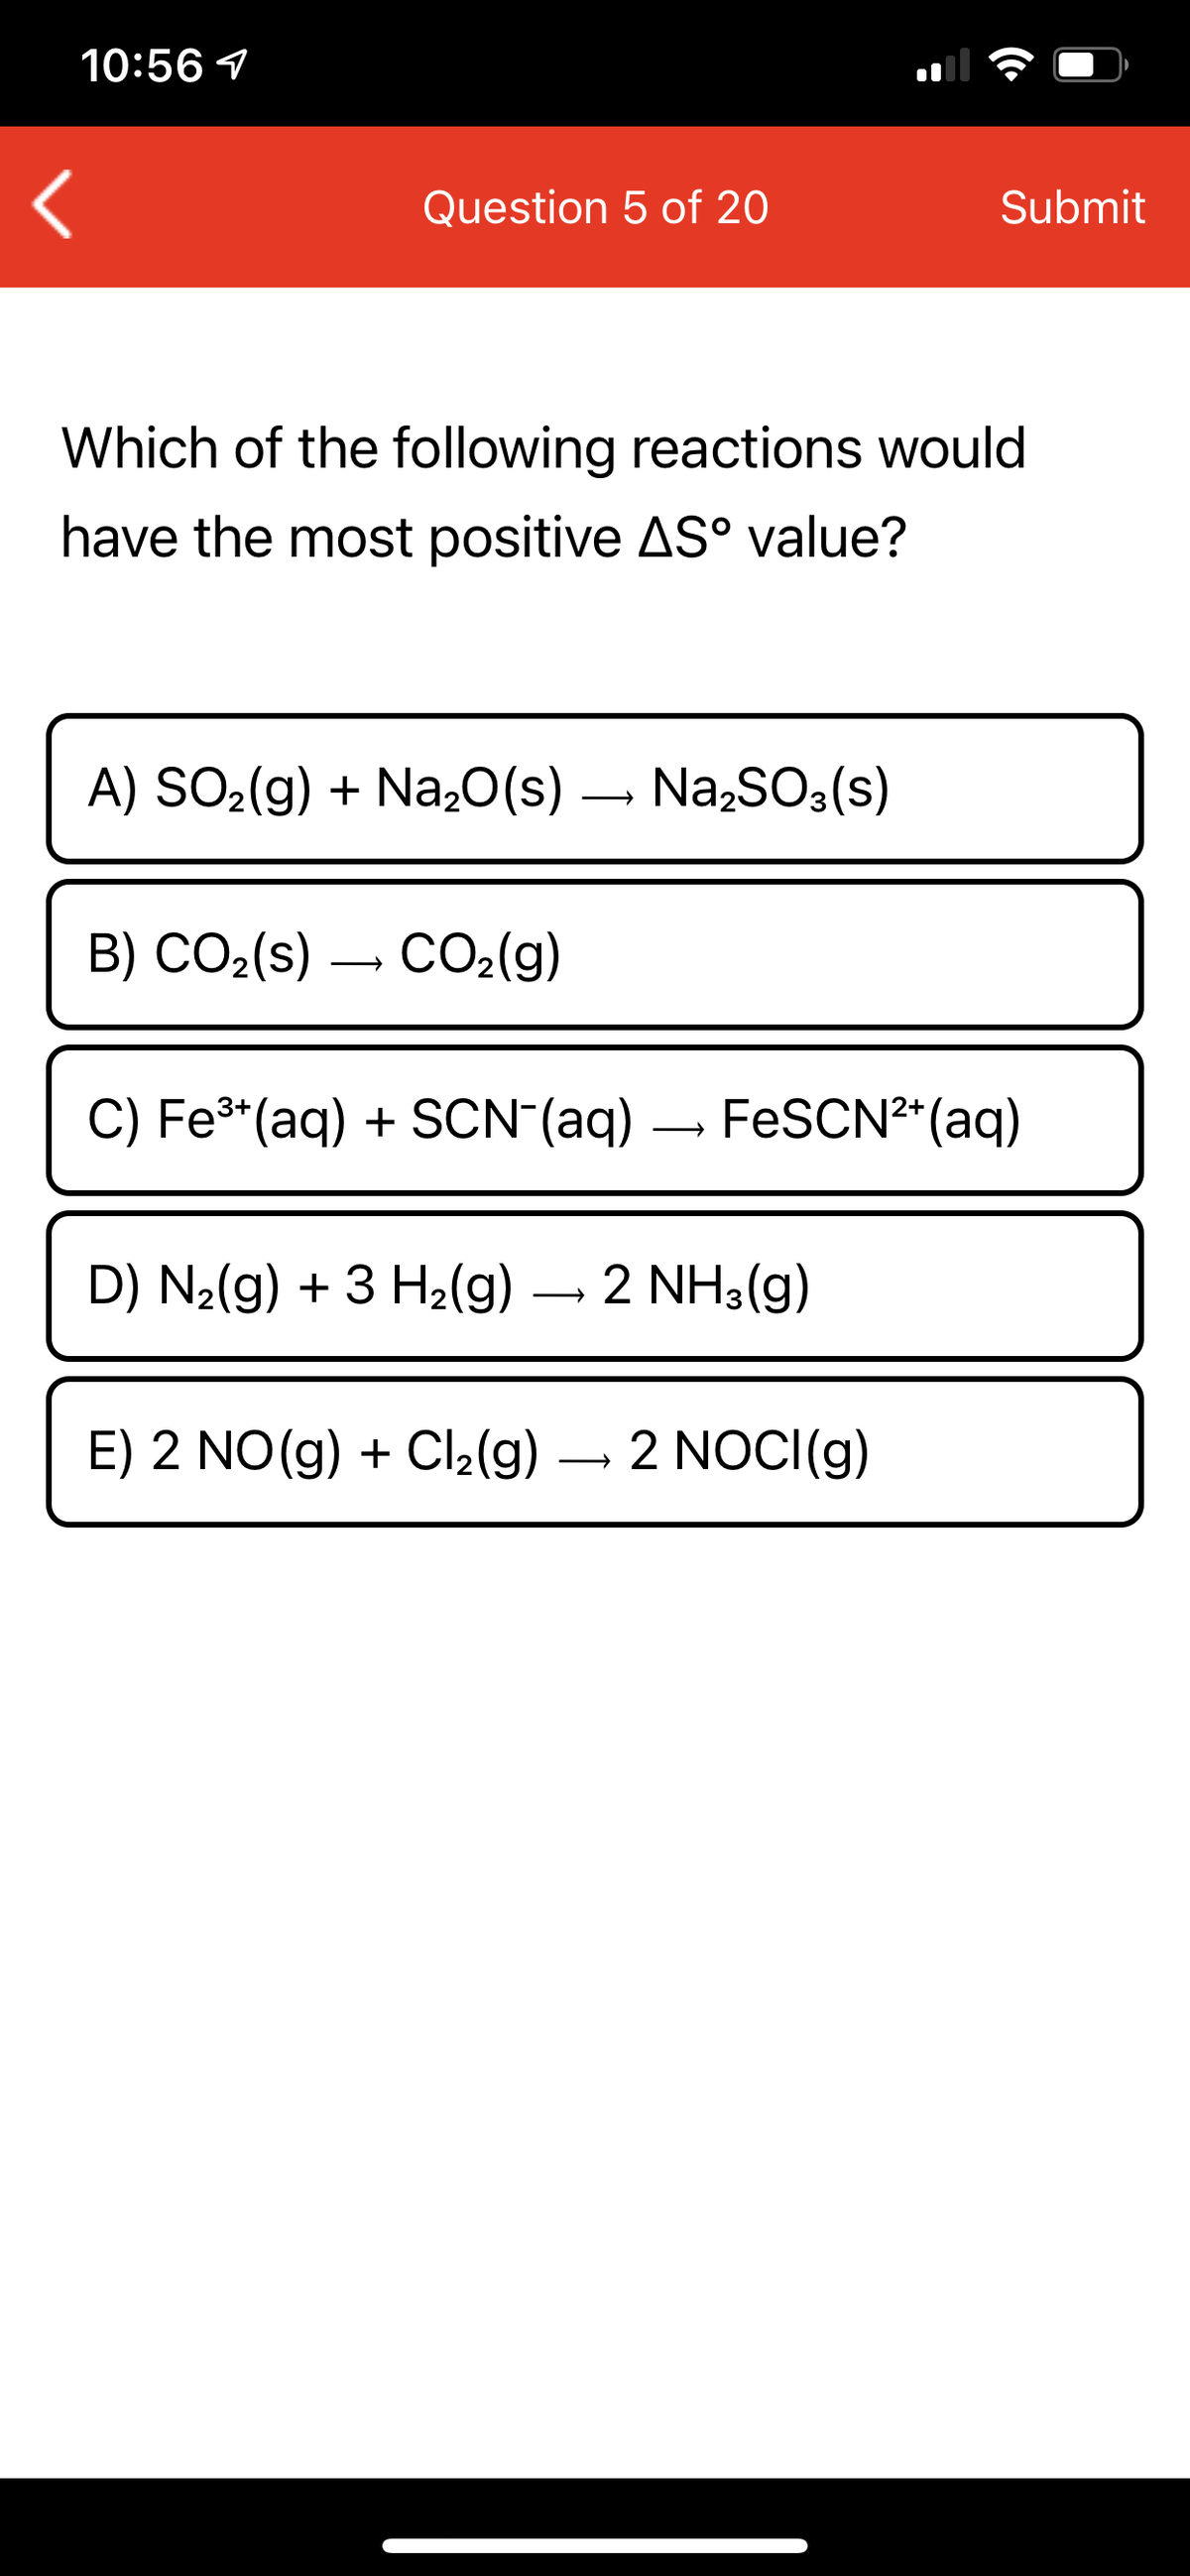 10:56 1
Question 5 of 20
Submit
Which of the following reactions would
have the most positive AS° value?
A) SO2(g) + Na,0(s) – Na,SO3(s)
B) CO2(s)
CO2(g)
C) Fe³*(aq) + SCN (aq) – FESCN²*(aq)
D) N2(g) + 3 H2(g)
2 NH3(g)
E) 2 NO(g) + Cl2(g) – 2 NOCI(g)
